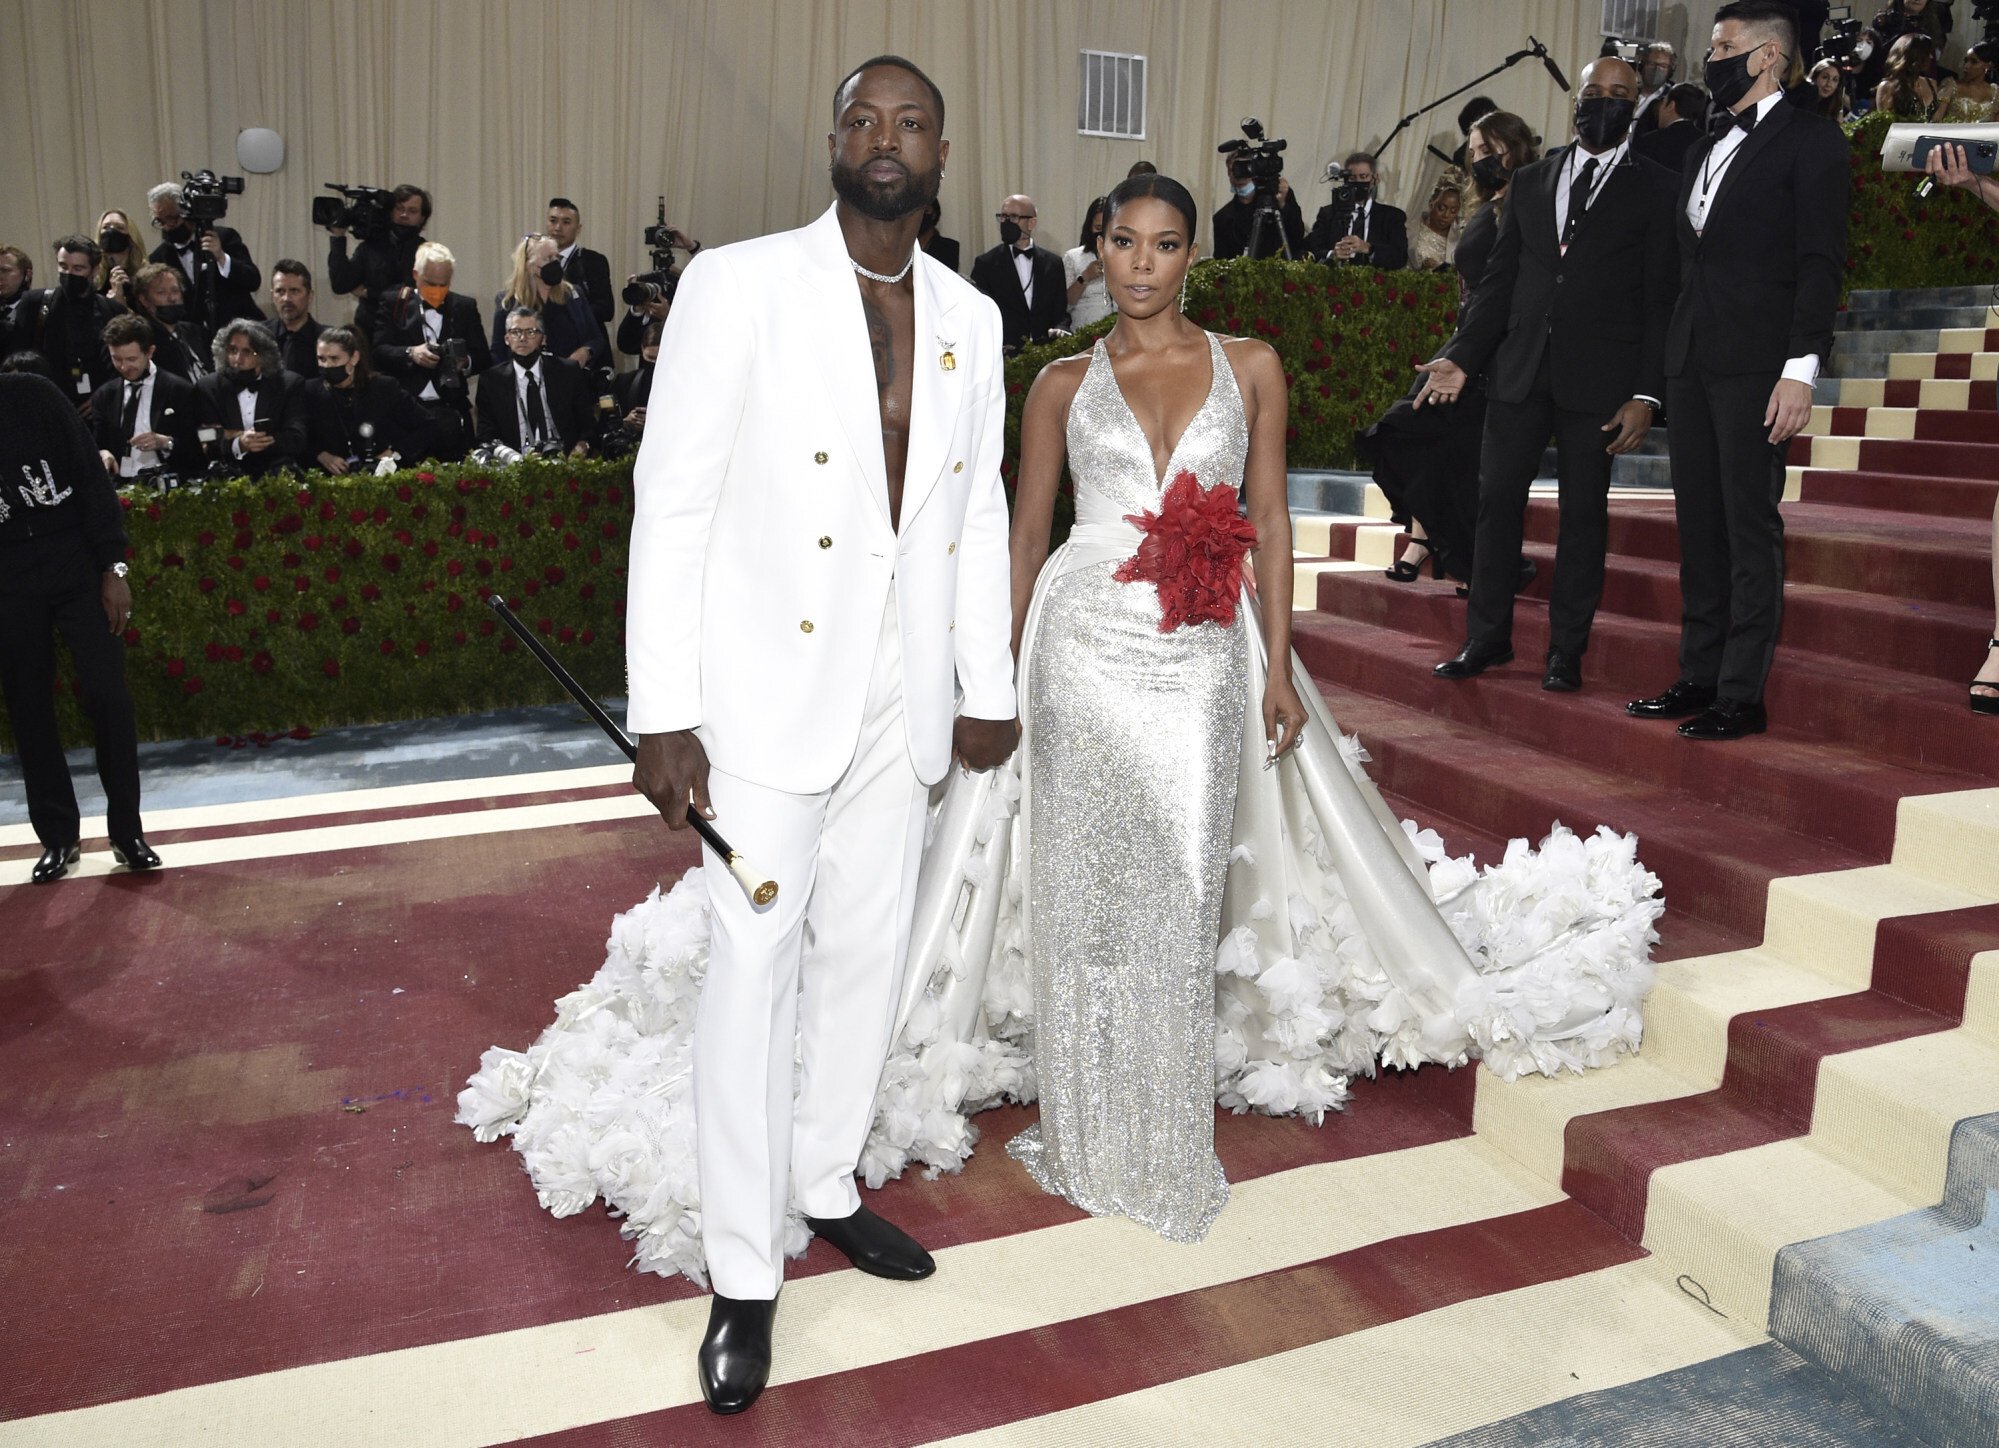 Dwyane Wade and his wife Gabrielle Union-Wade both wore Atelier Versace to The Metropolitan Museum of Art’s Costume Institute benefit gala. Photo: AP